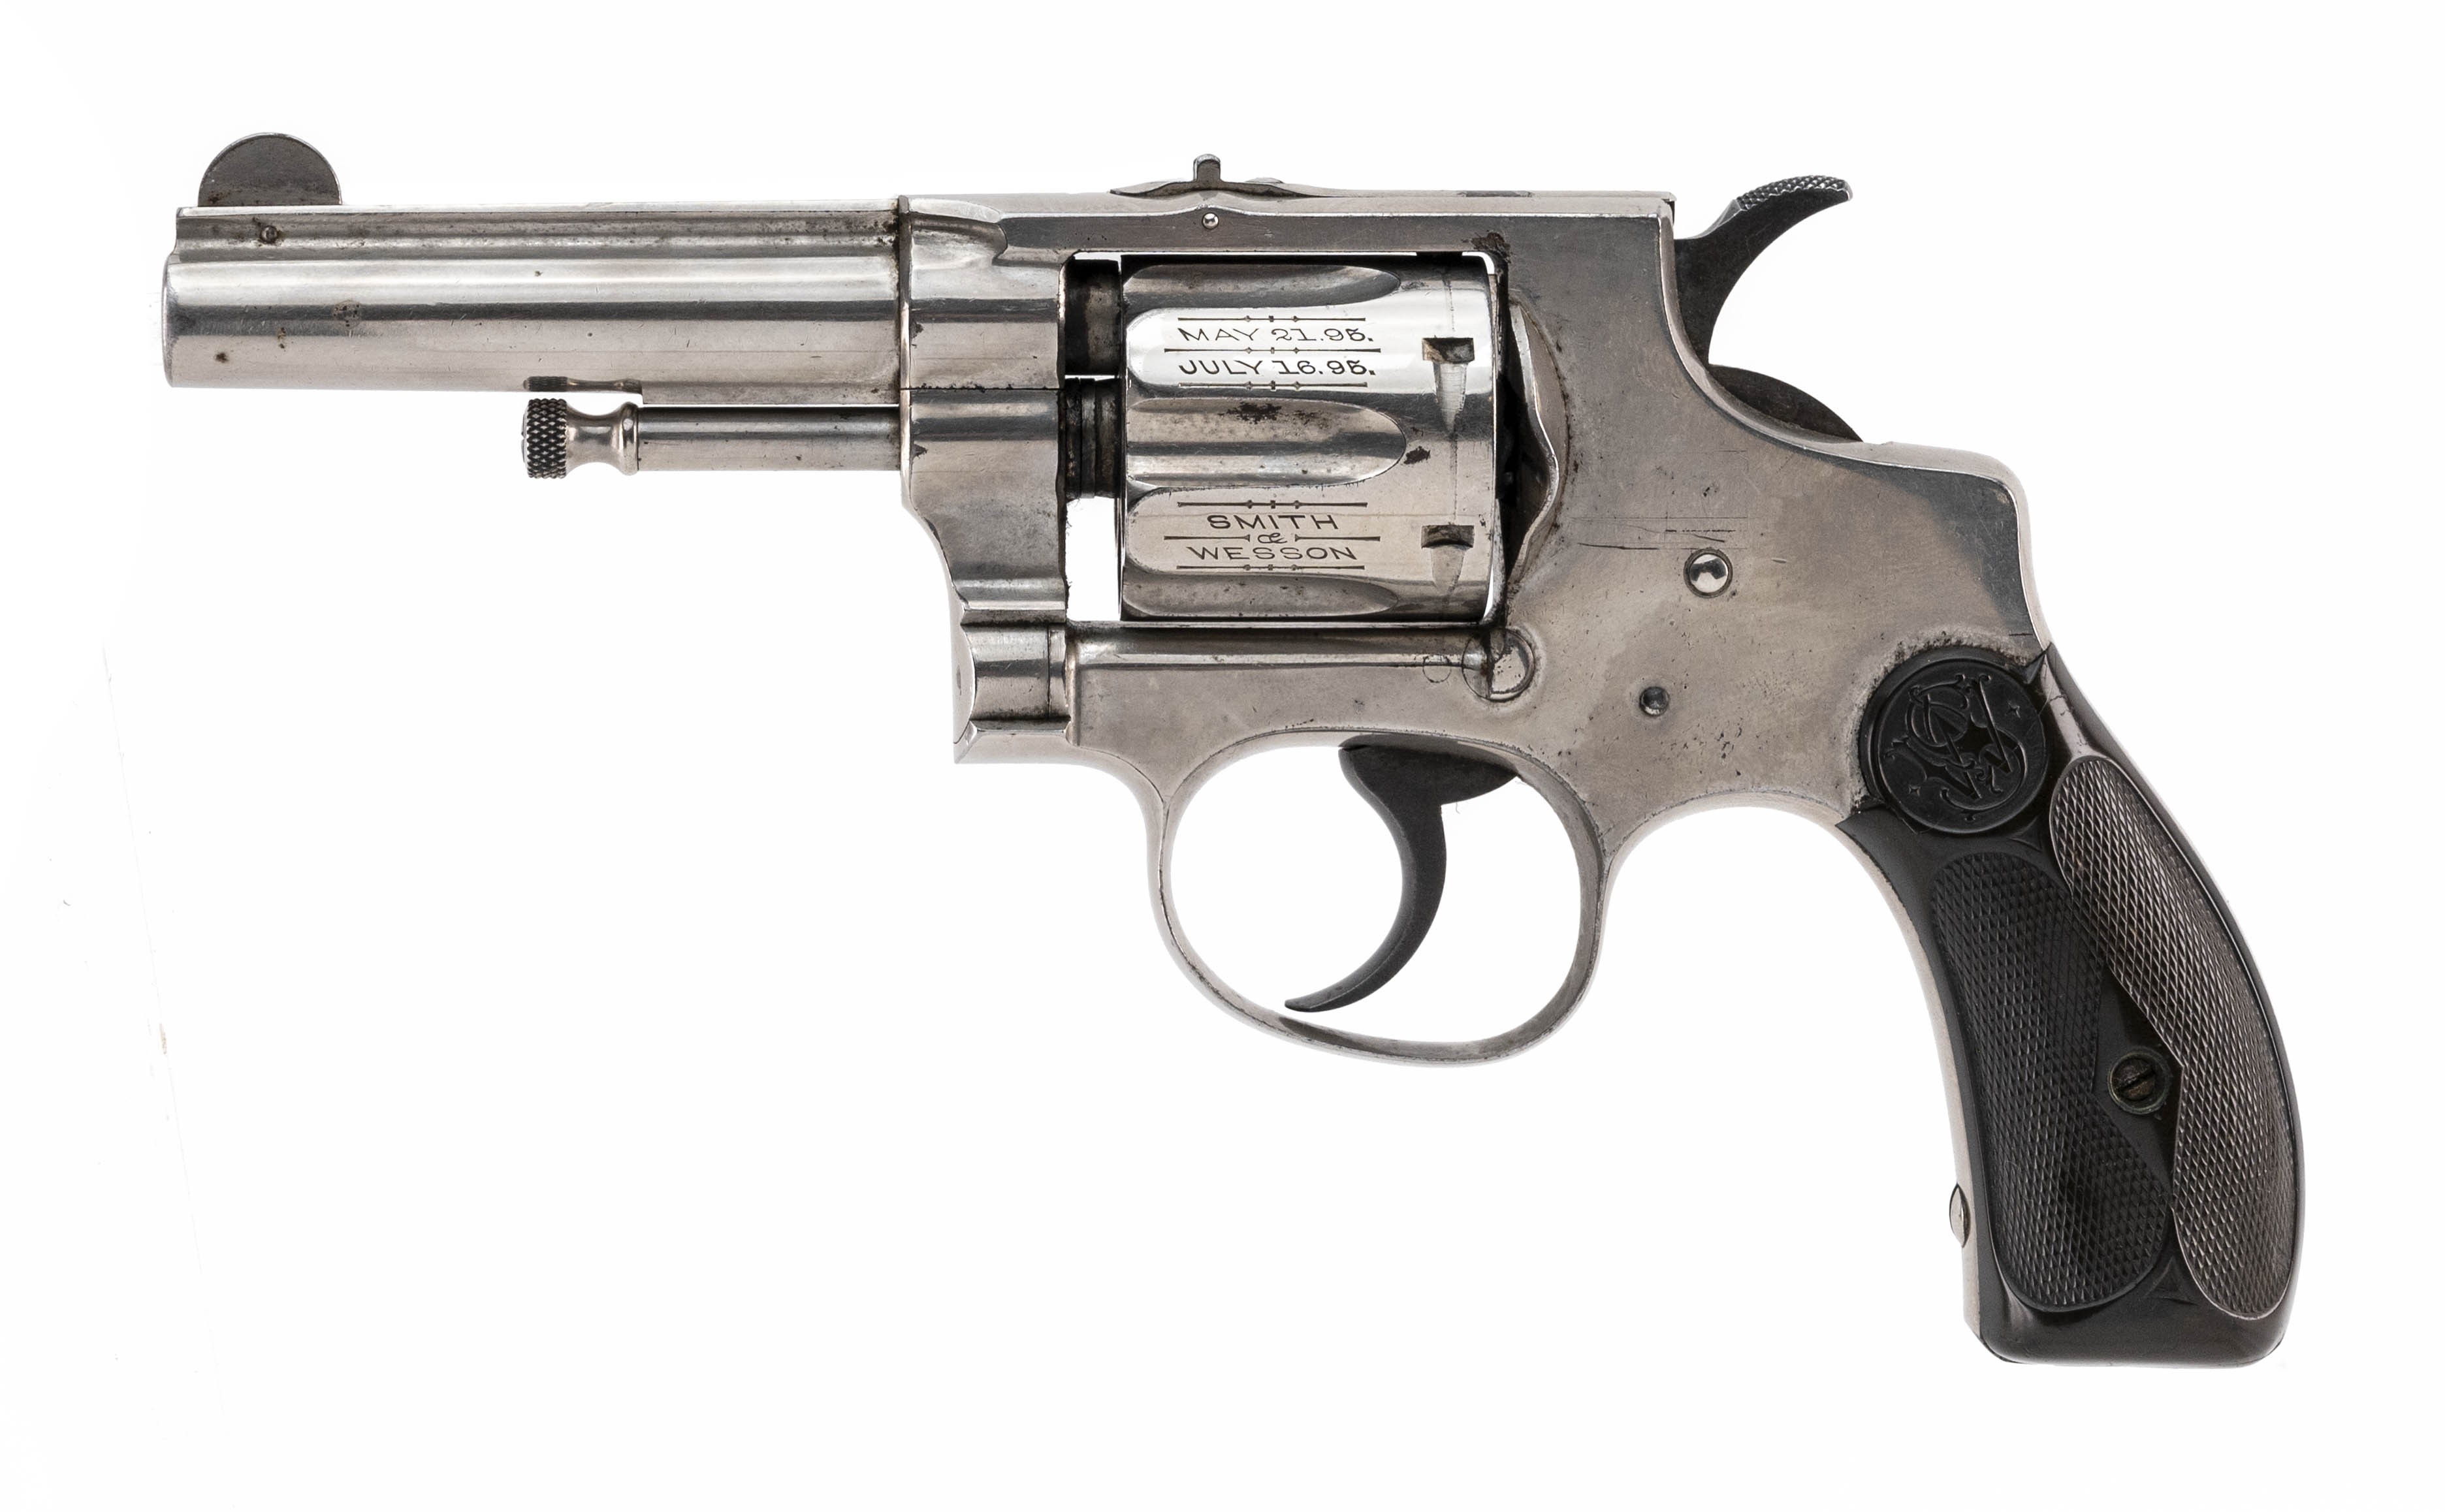 A nice example of Smith & Wesson's first swing out cylinder.